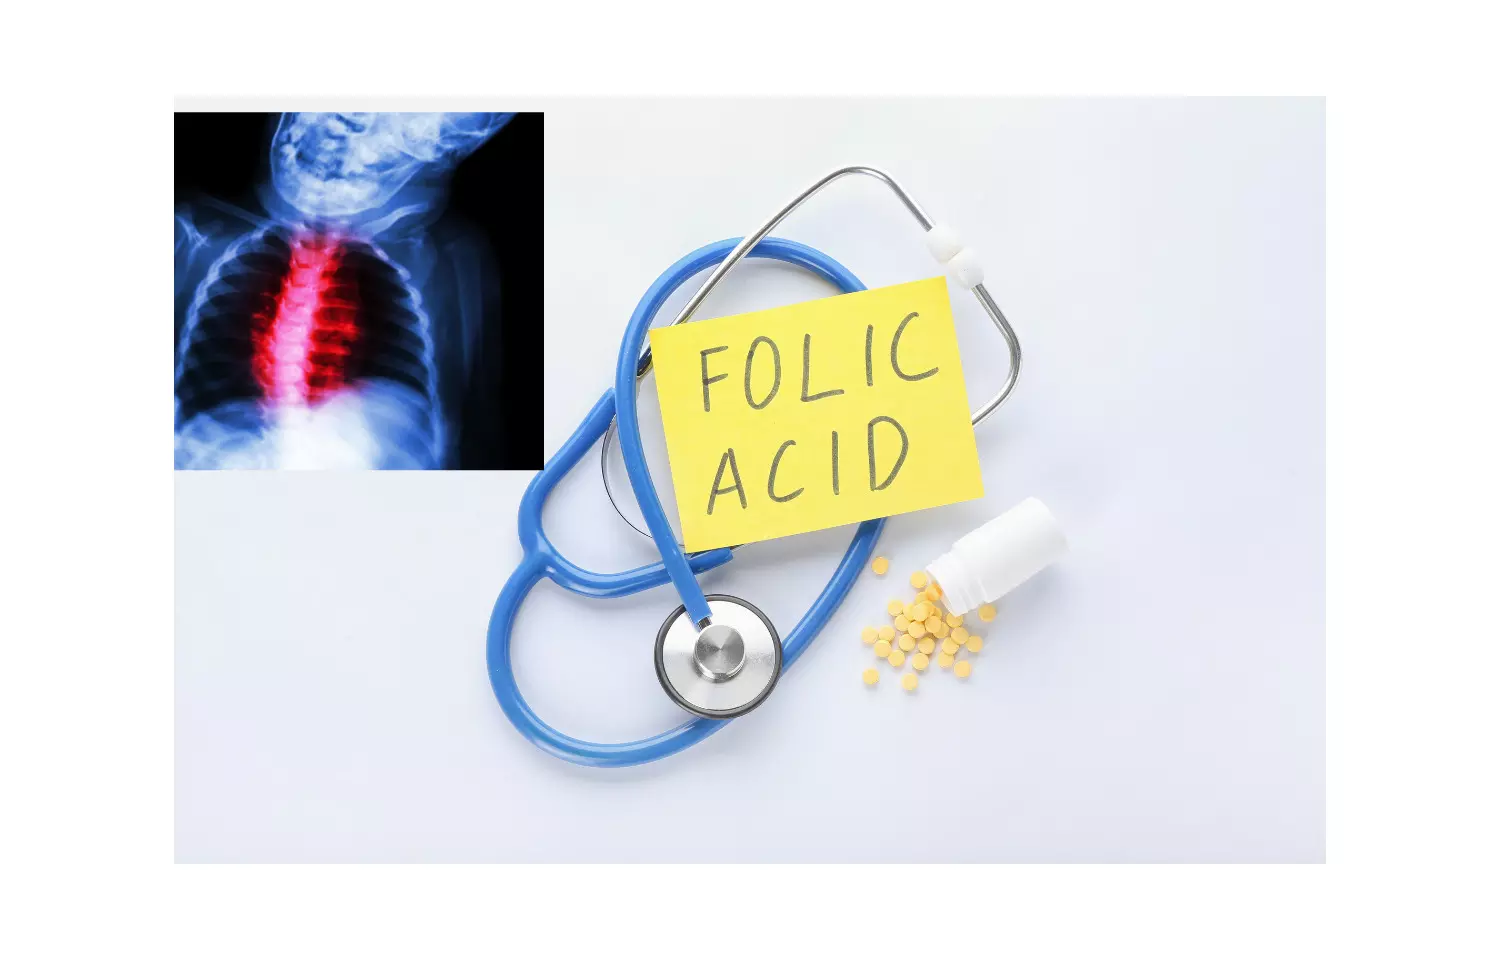 Folic acid supplements during preconception reduce congenital heart defects in offsprings: Study